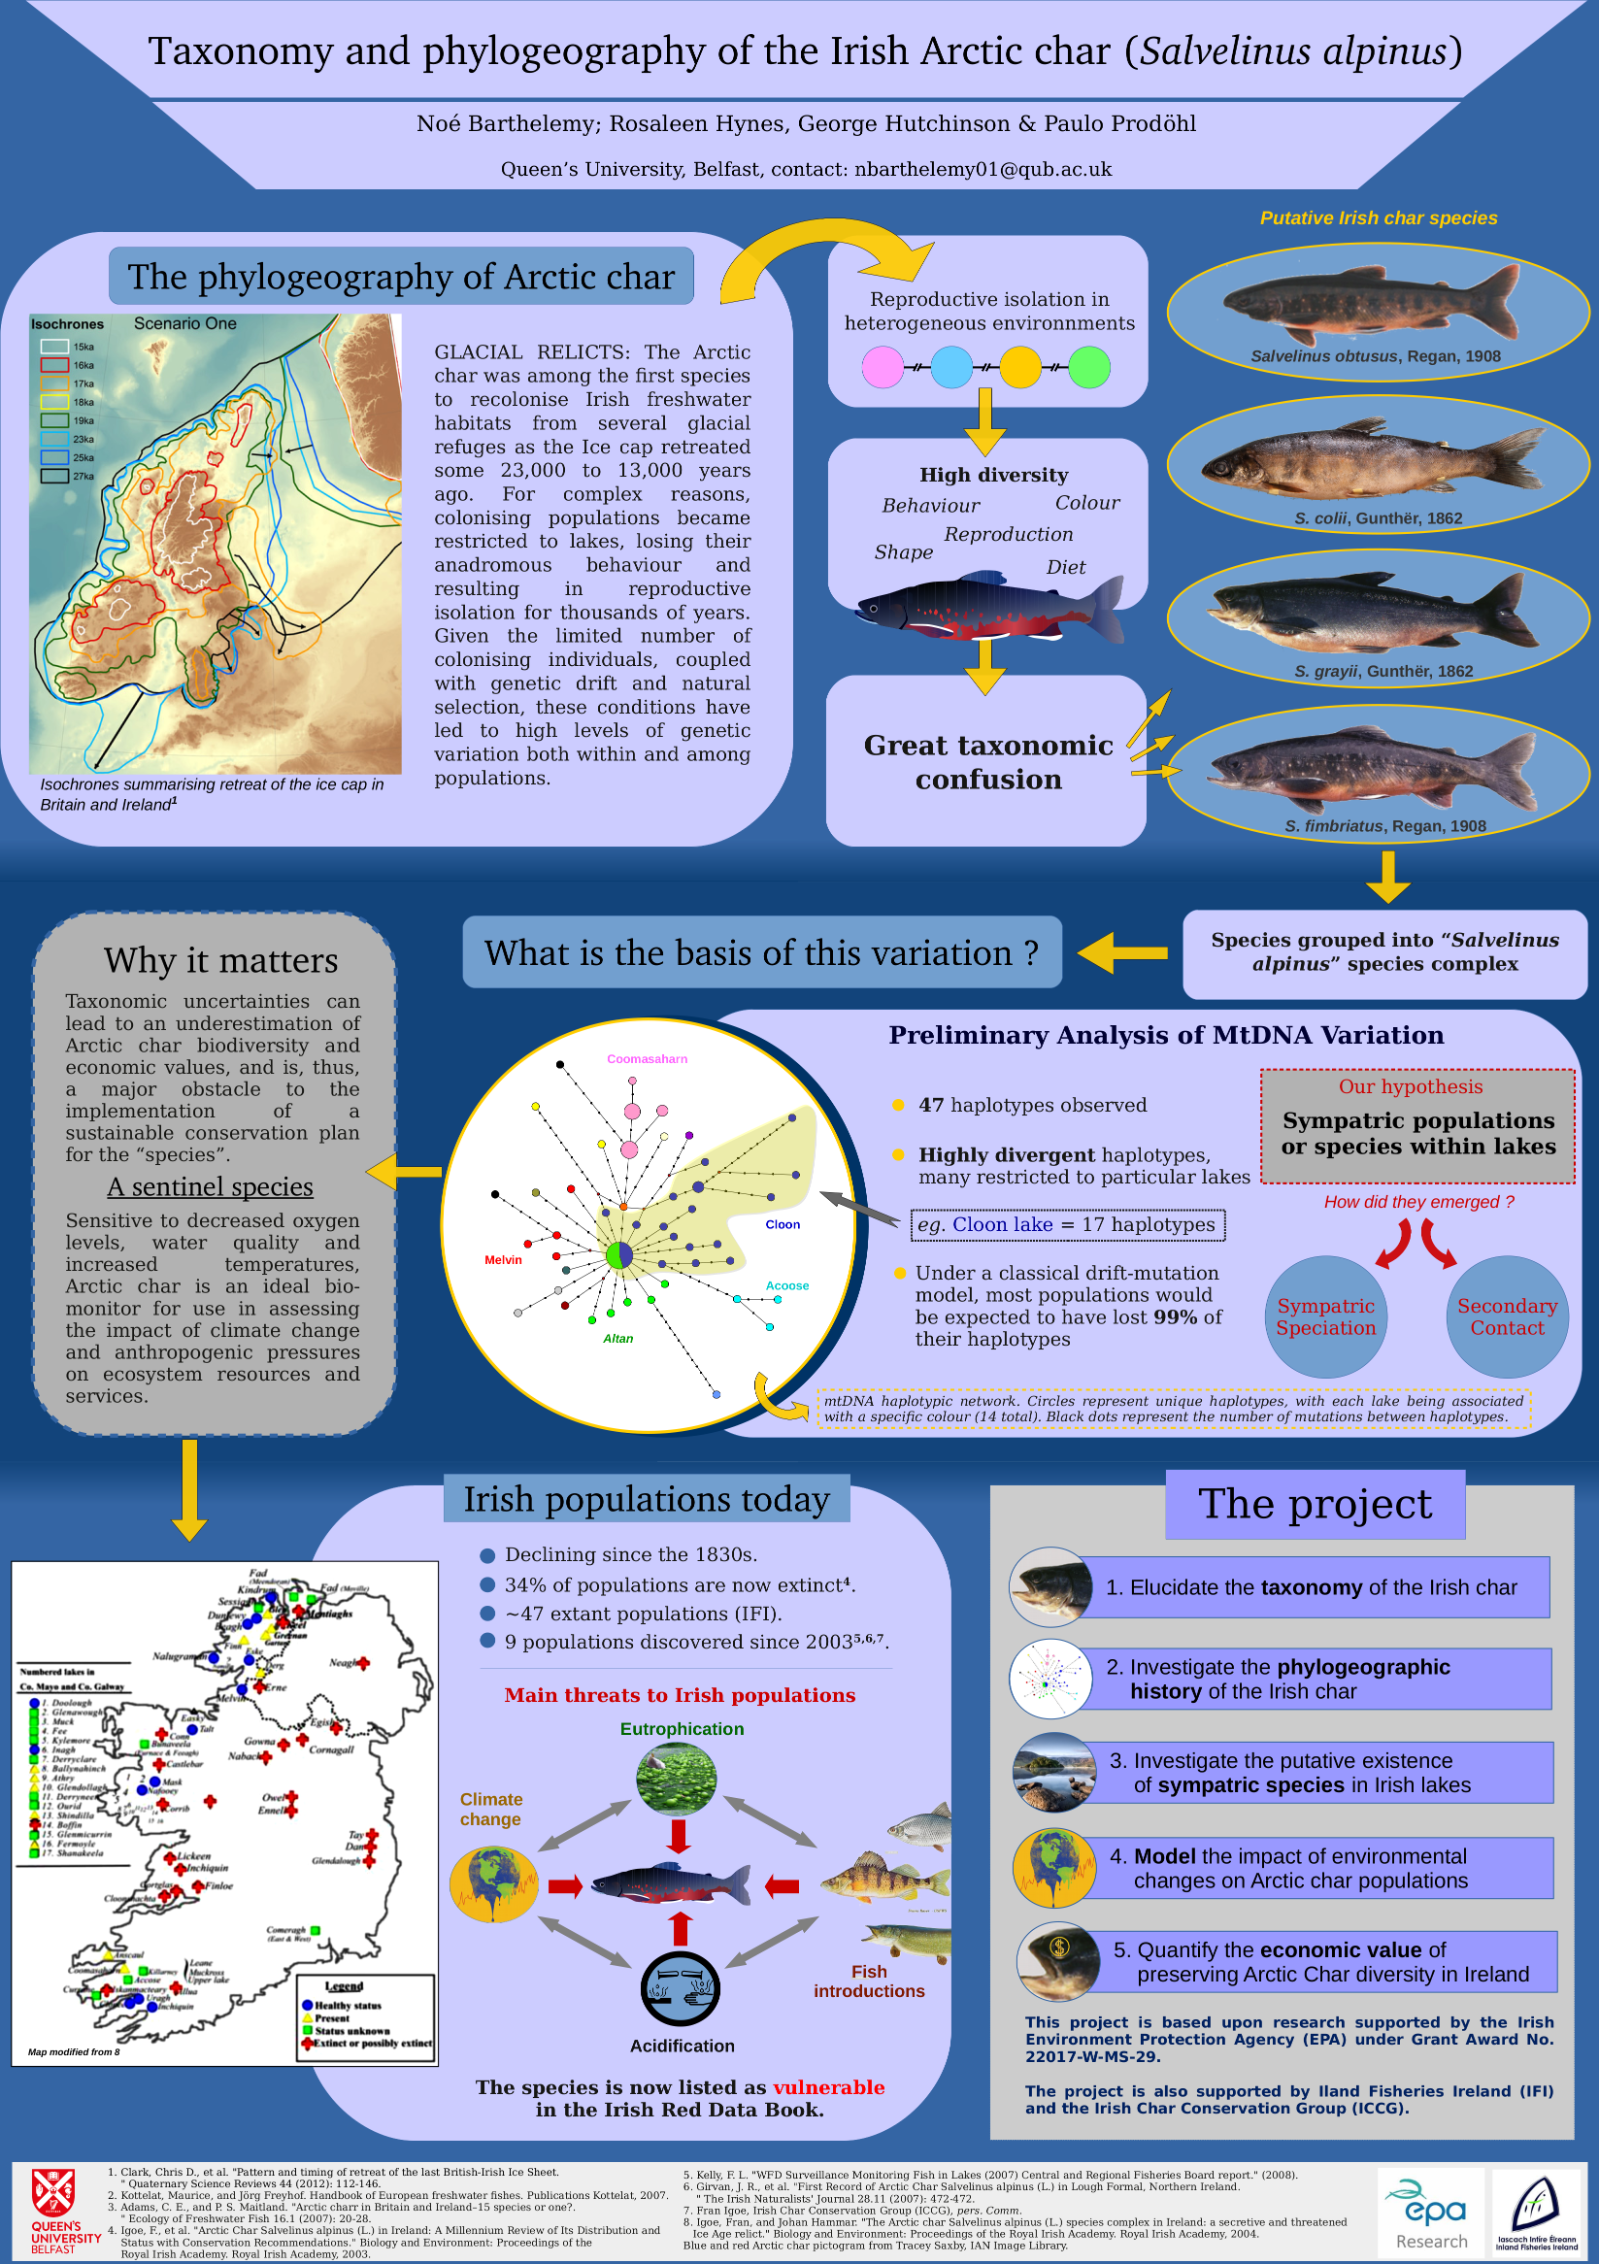 Poster presented at the Ecology and Evolution 2019 Conference in Galway